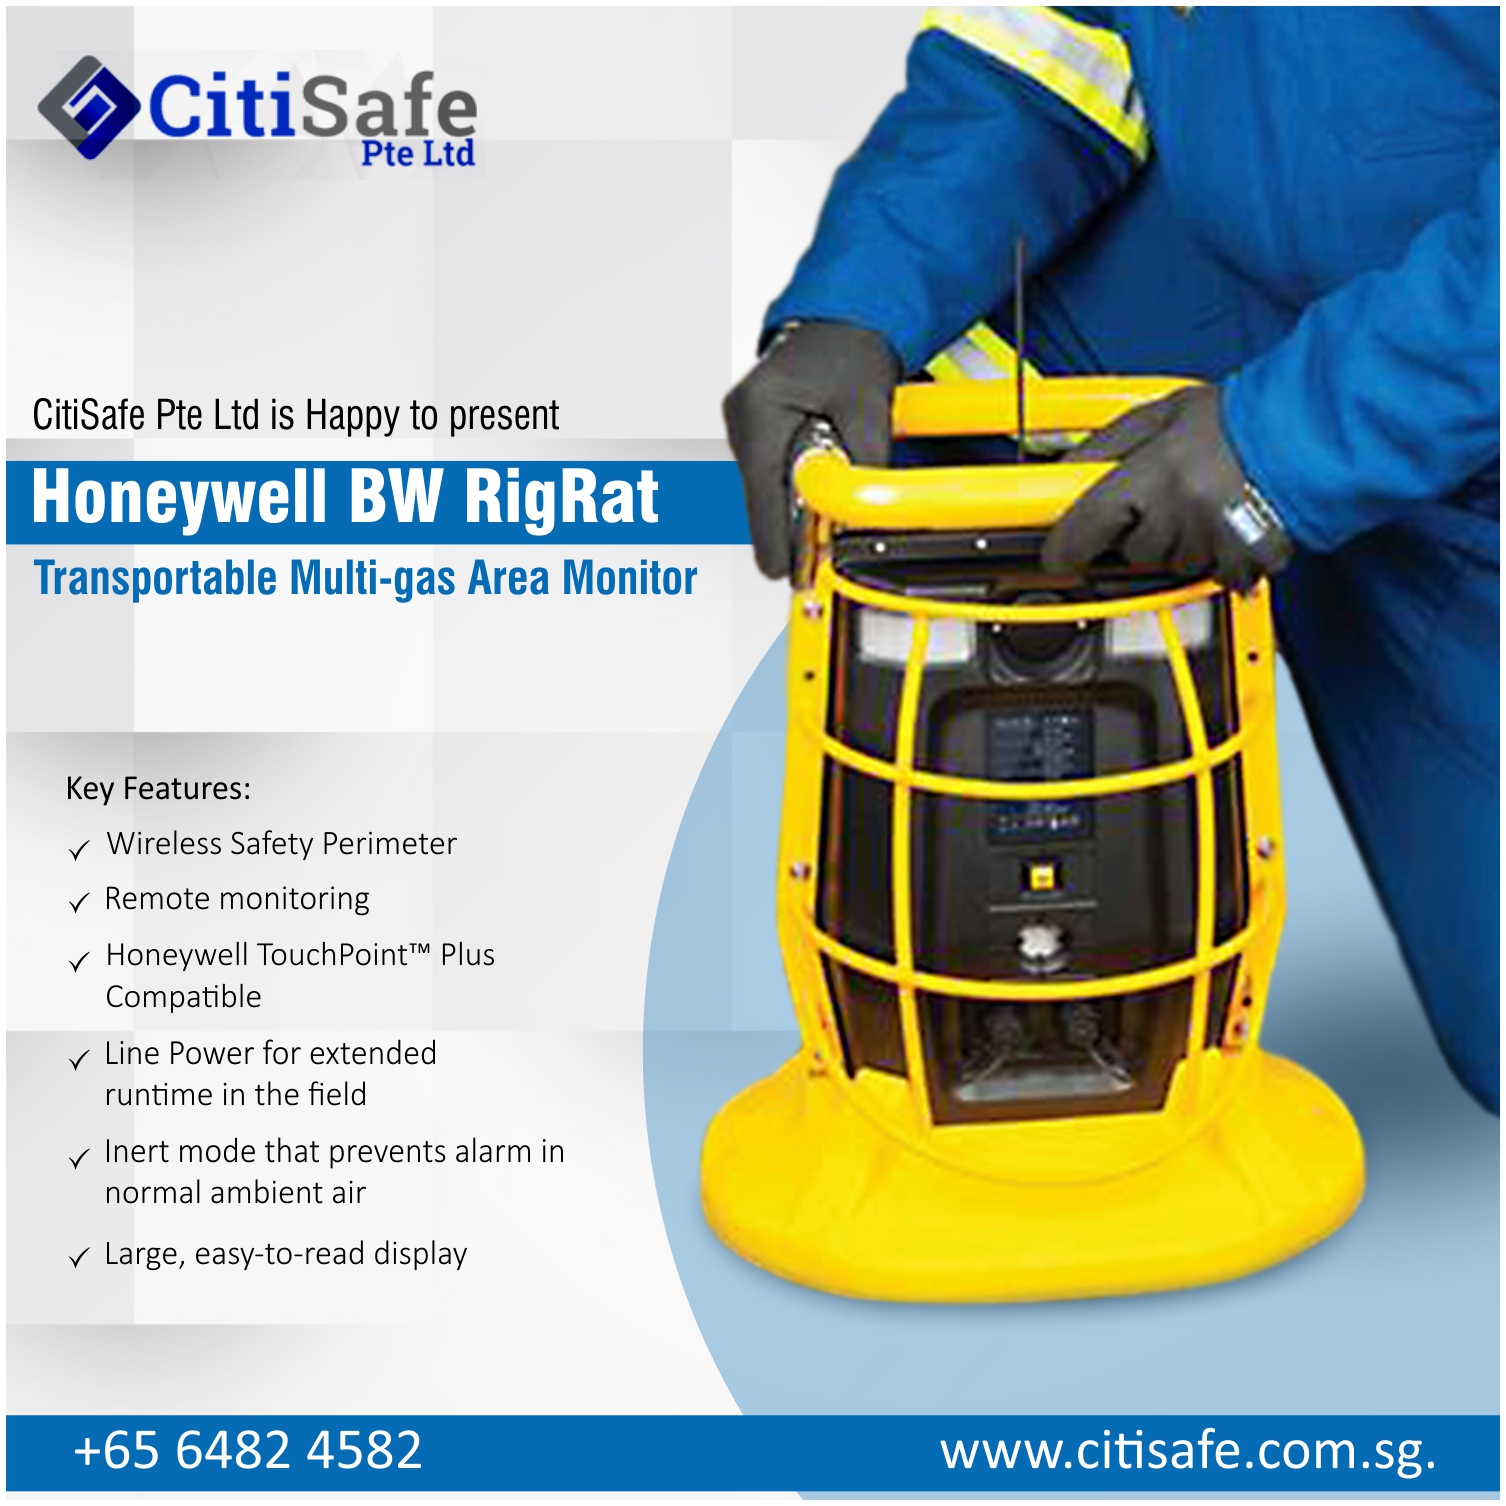 CitiSafe Pte Ltd is Happy to present Honeywell's BW RigRat Transportable Multi-gas Area Monitor